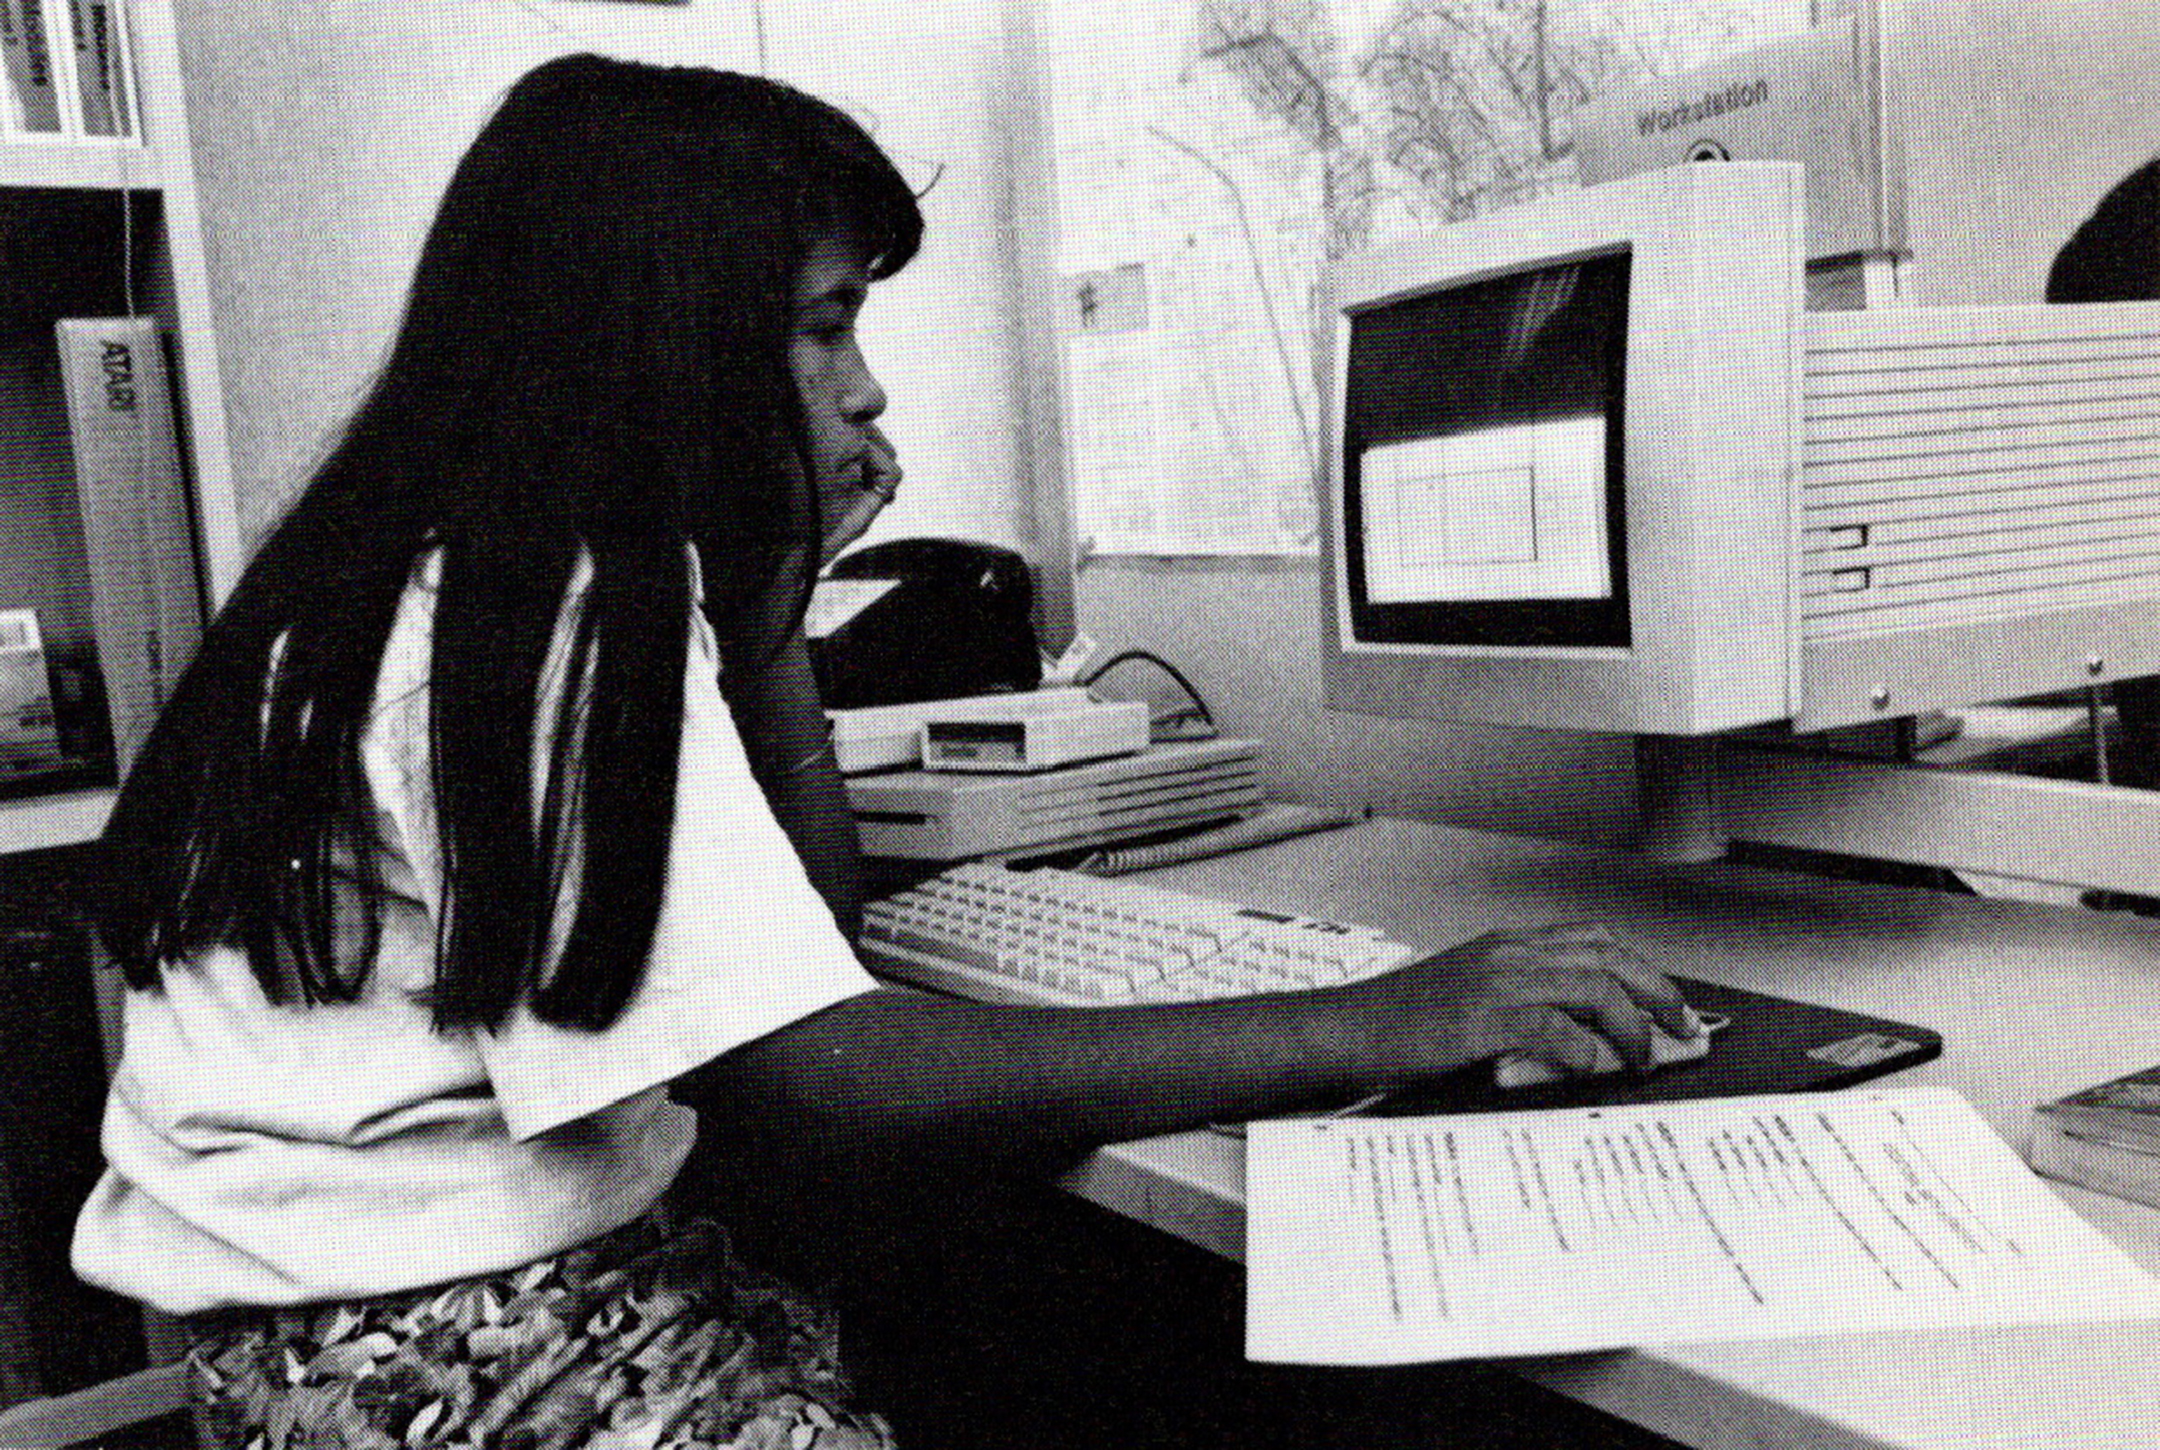 Black and white photo of a young female student sitting in front of an old desktop computer in her bedroom